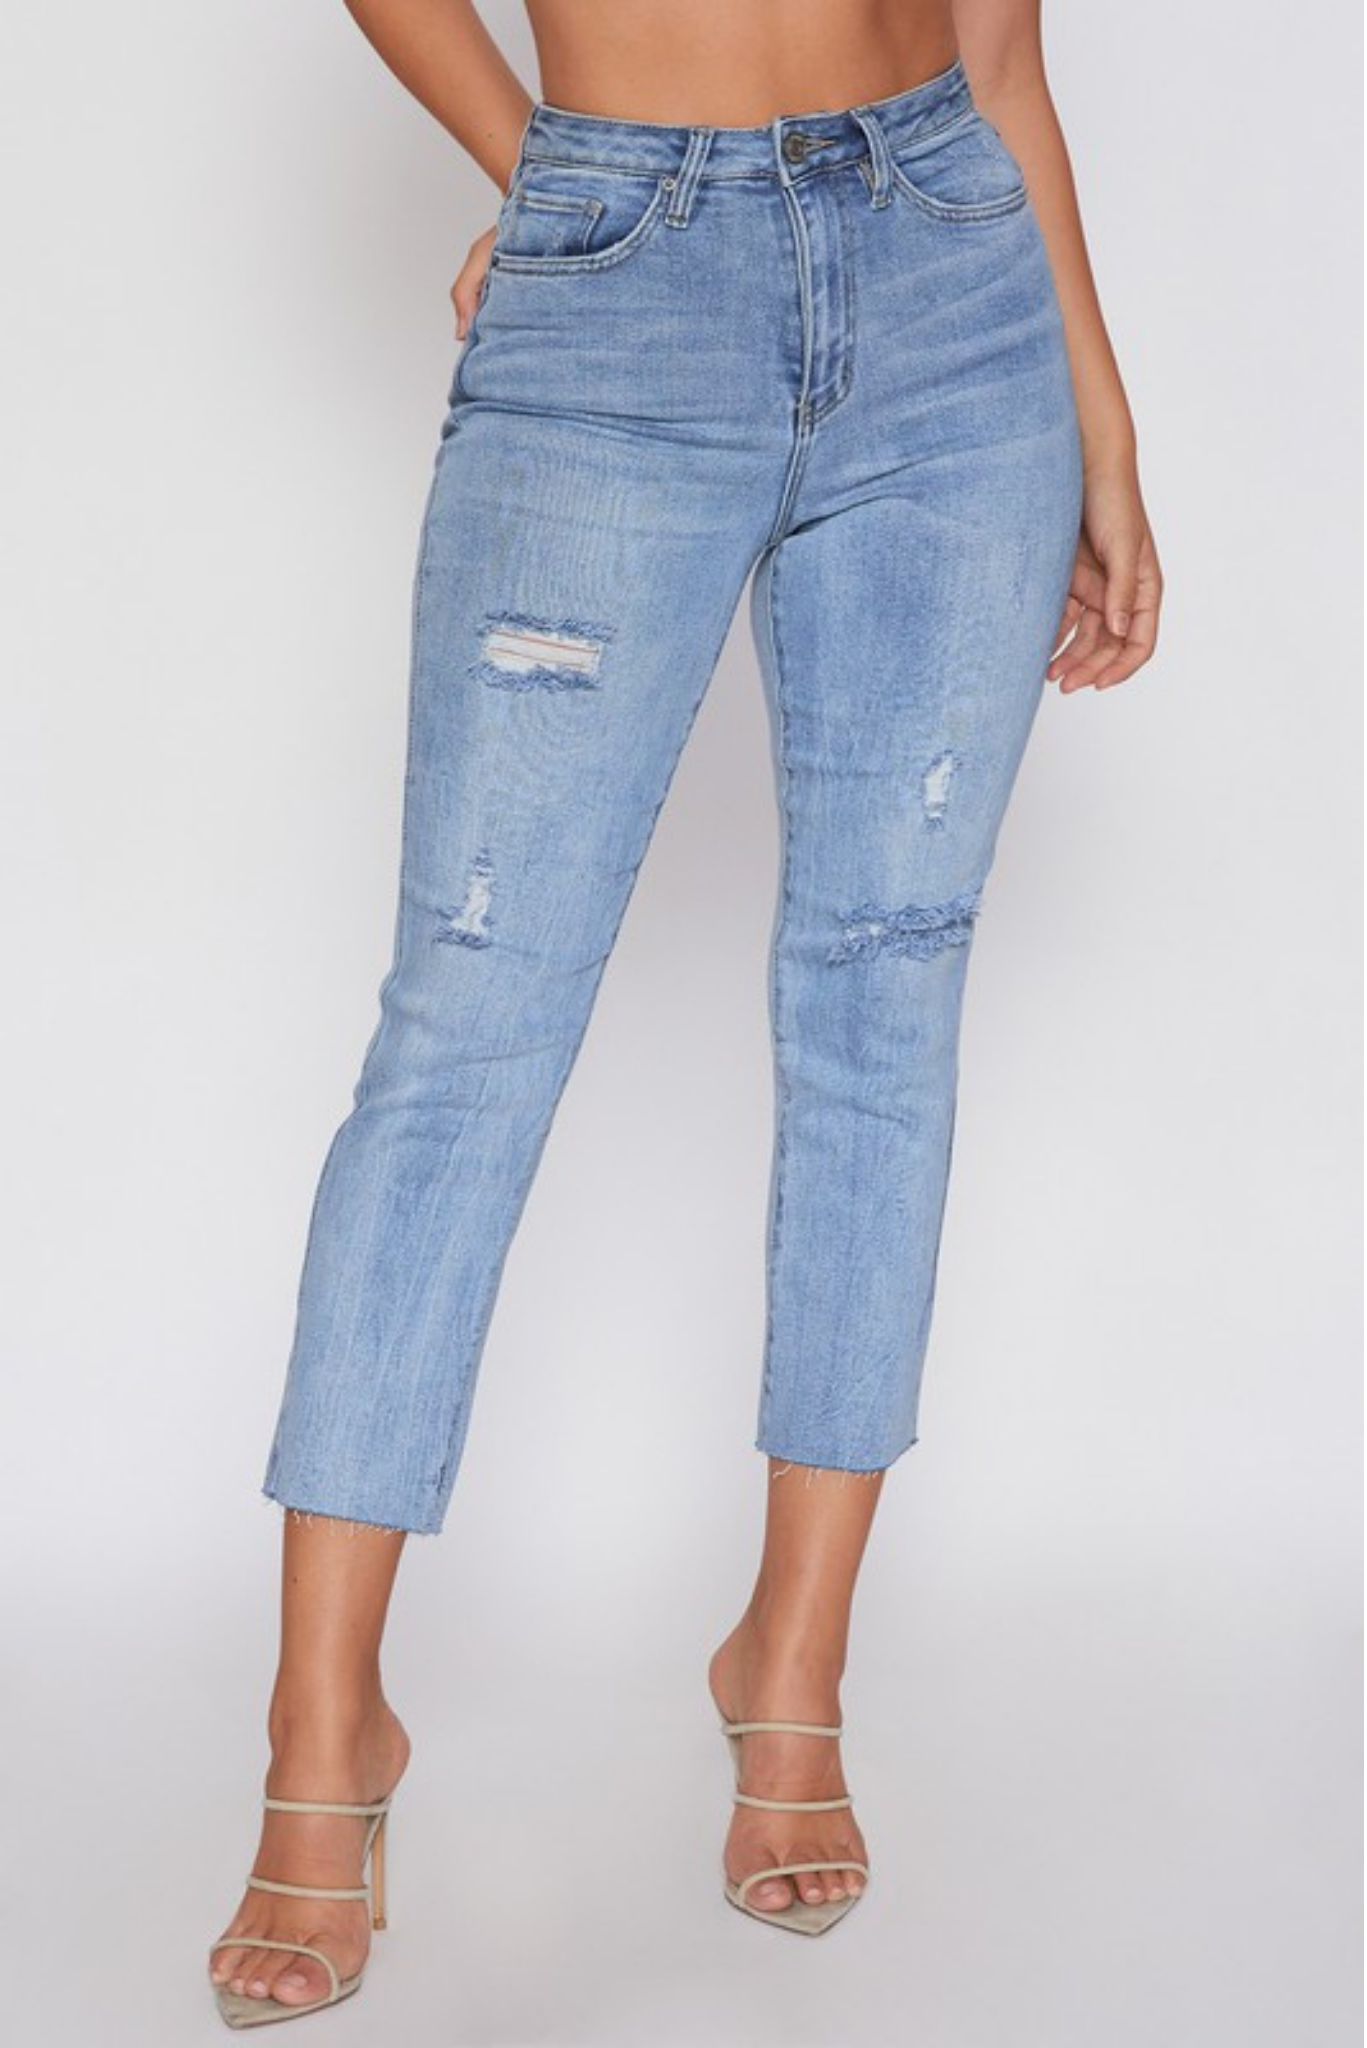 High Waisted Distressed Raw Hem Ankle Jeans*FINAL SALE*